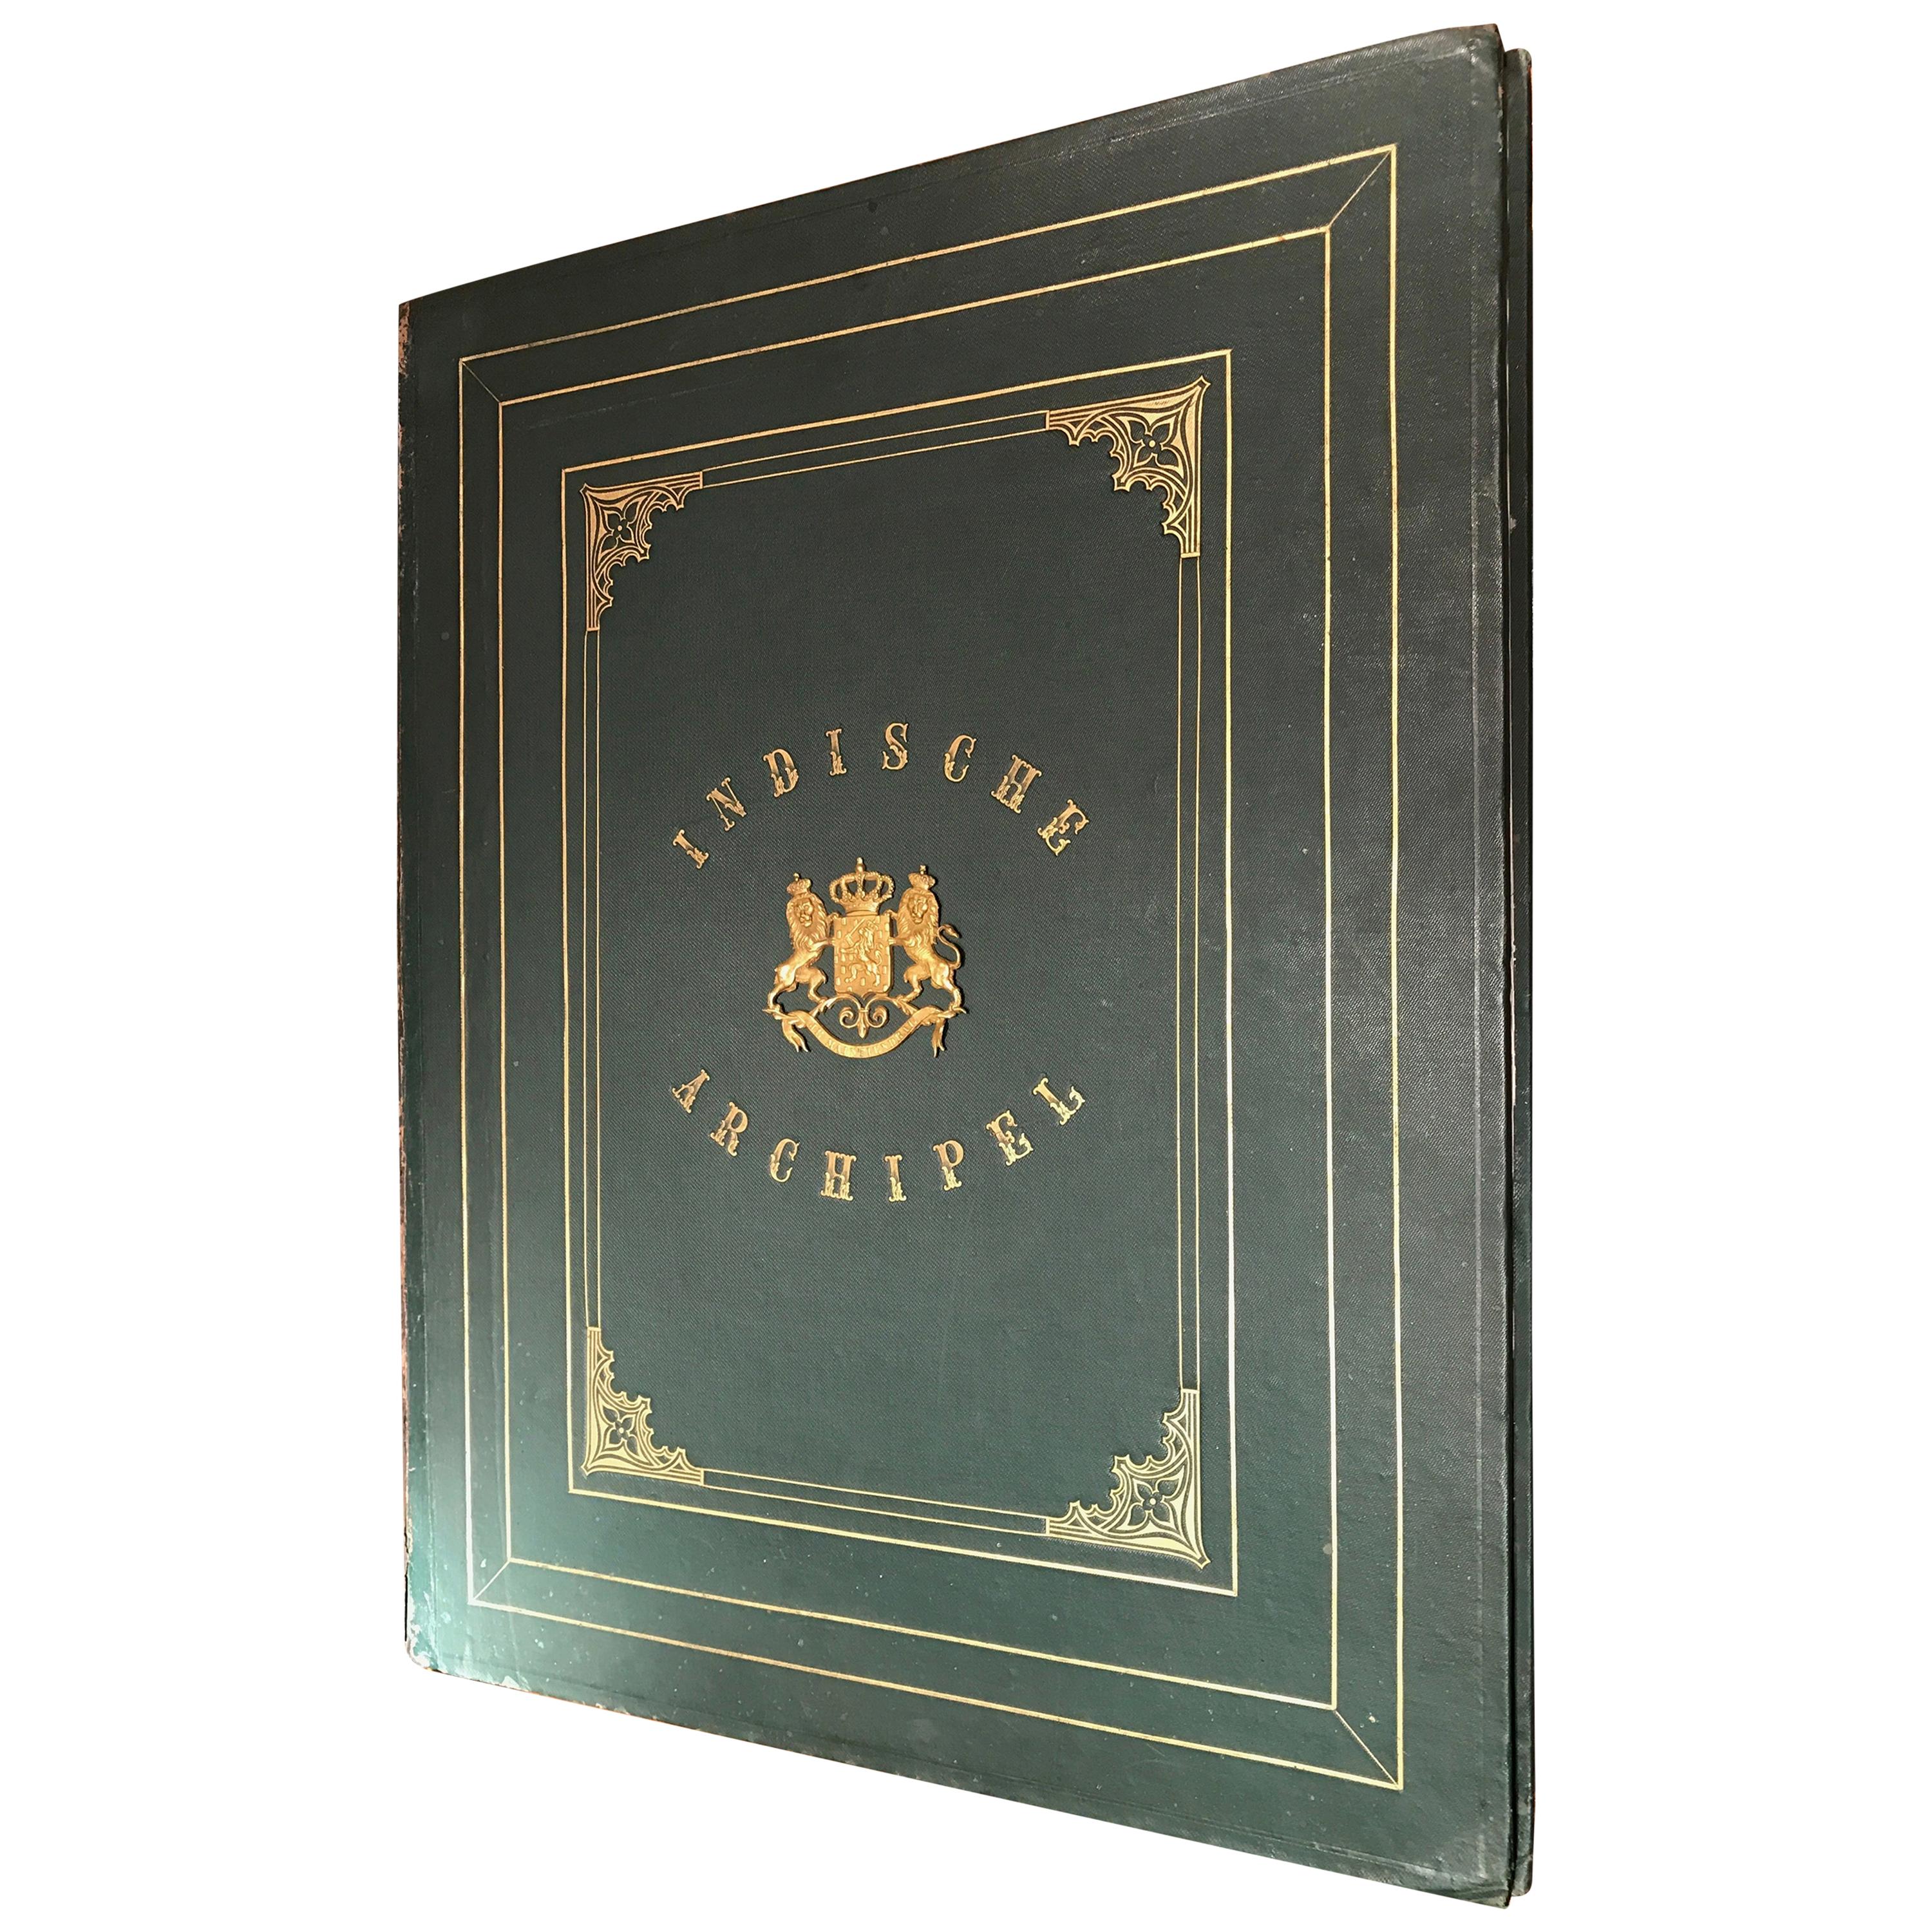 De Indische Archipel by C.W. Mieling, 1865-1876 For Sale